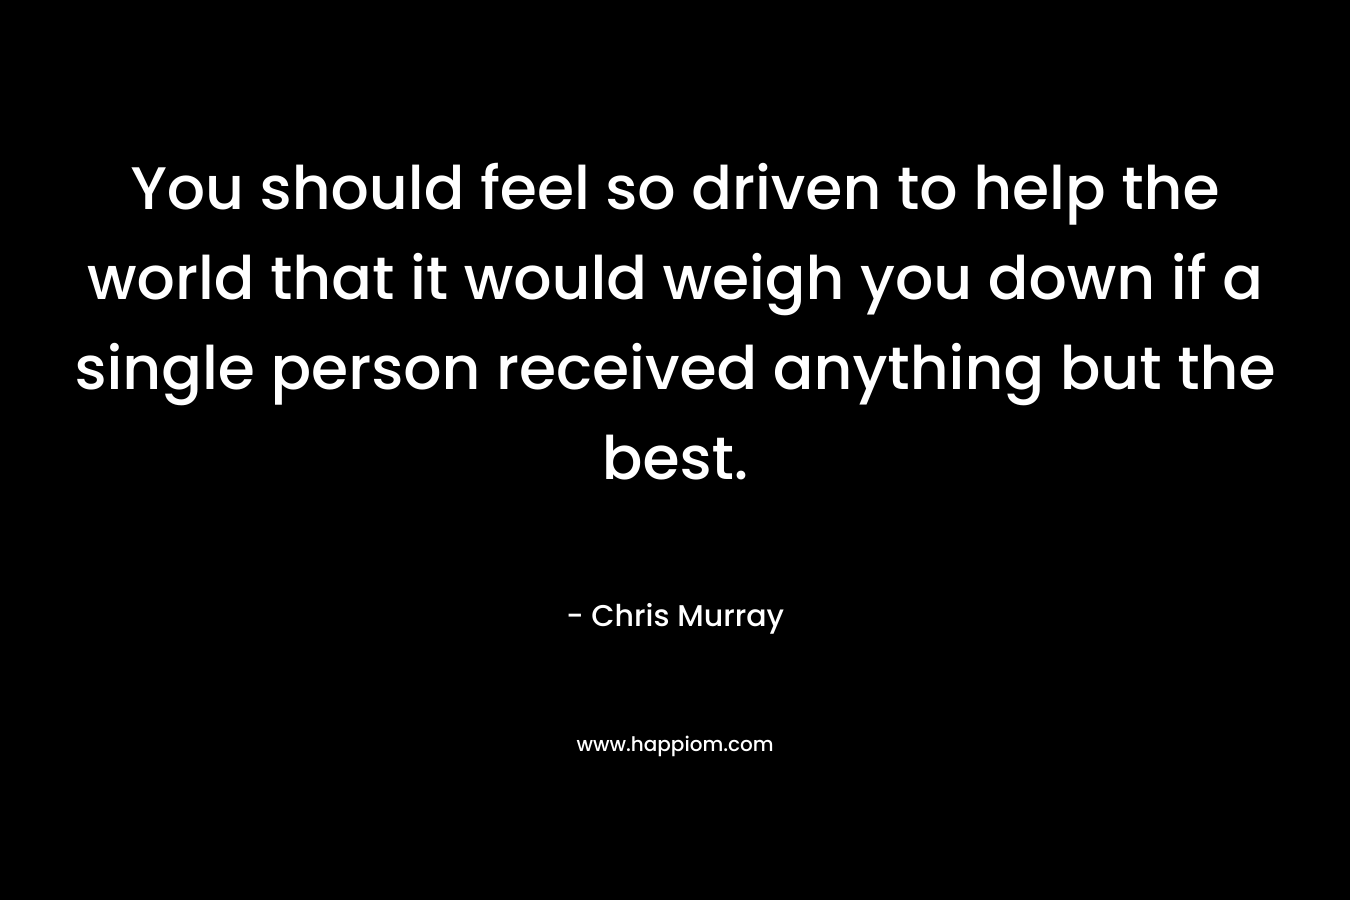 You should feel so driven to help the world that it would weigh you down if a single person received anything but the best.